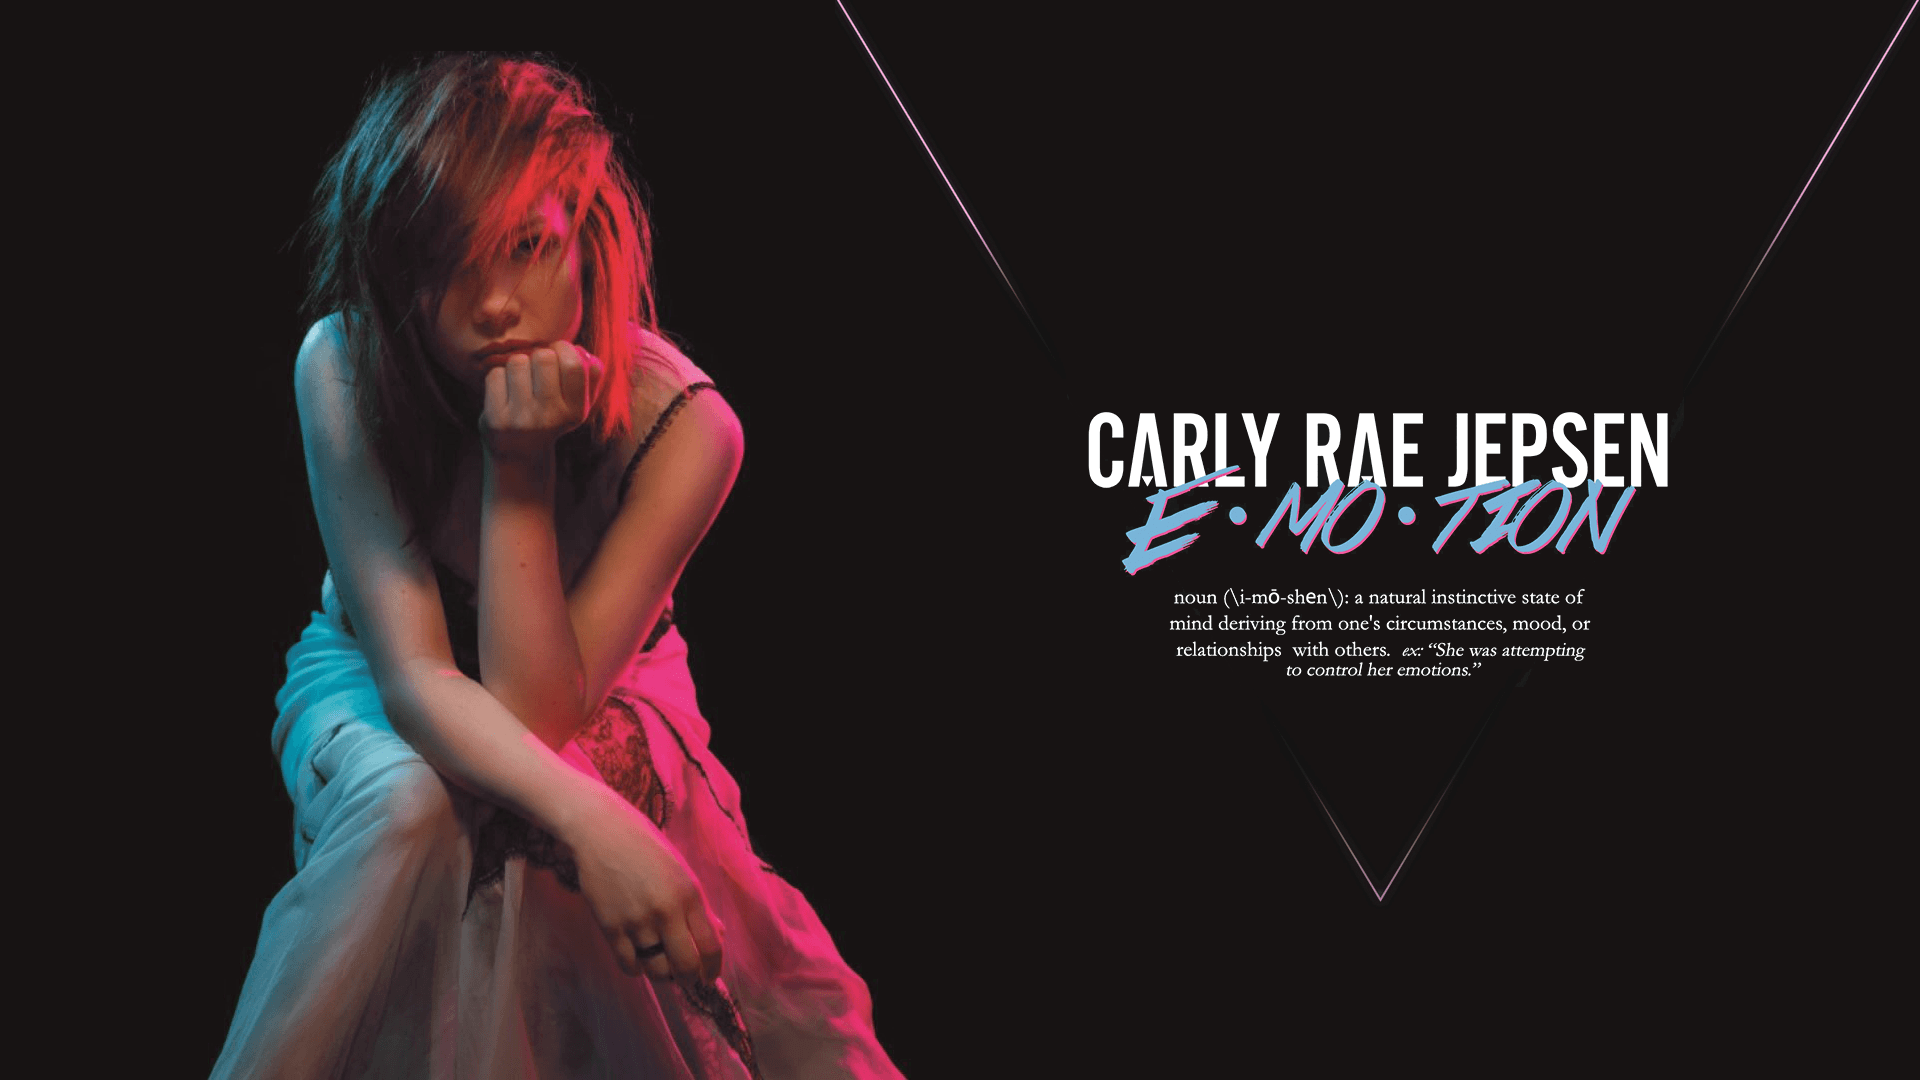 Are there any more cool Carly wallpaper like this one I